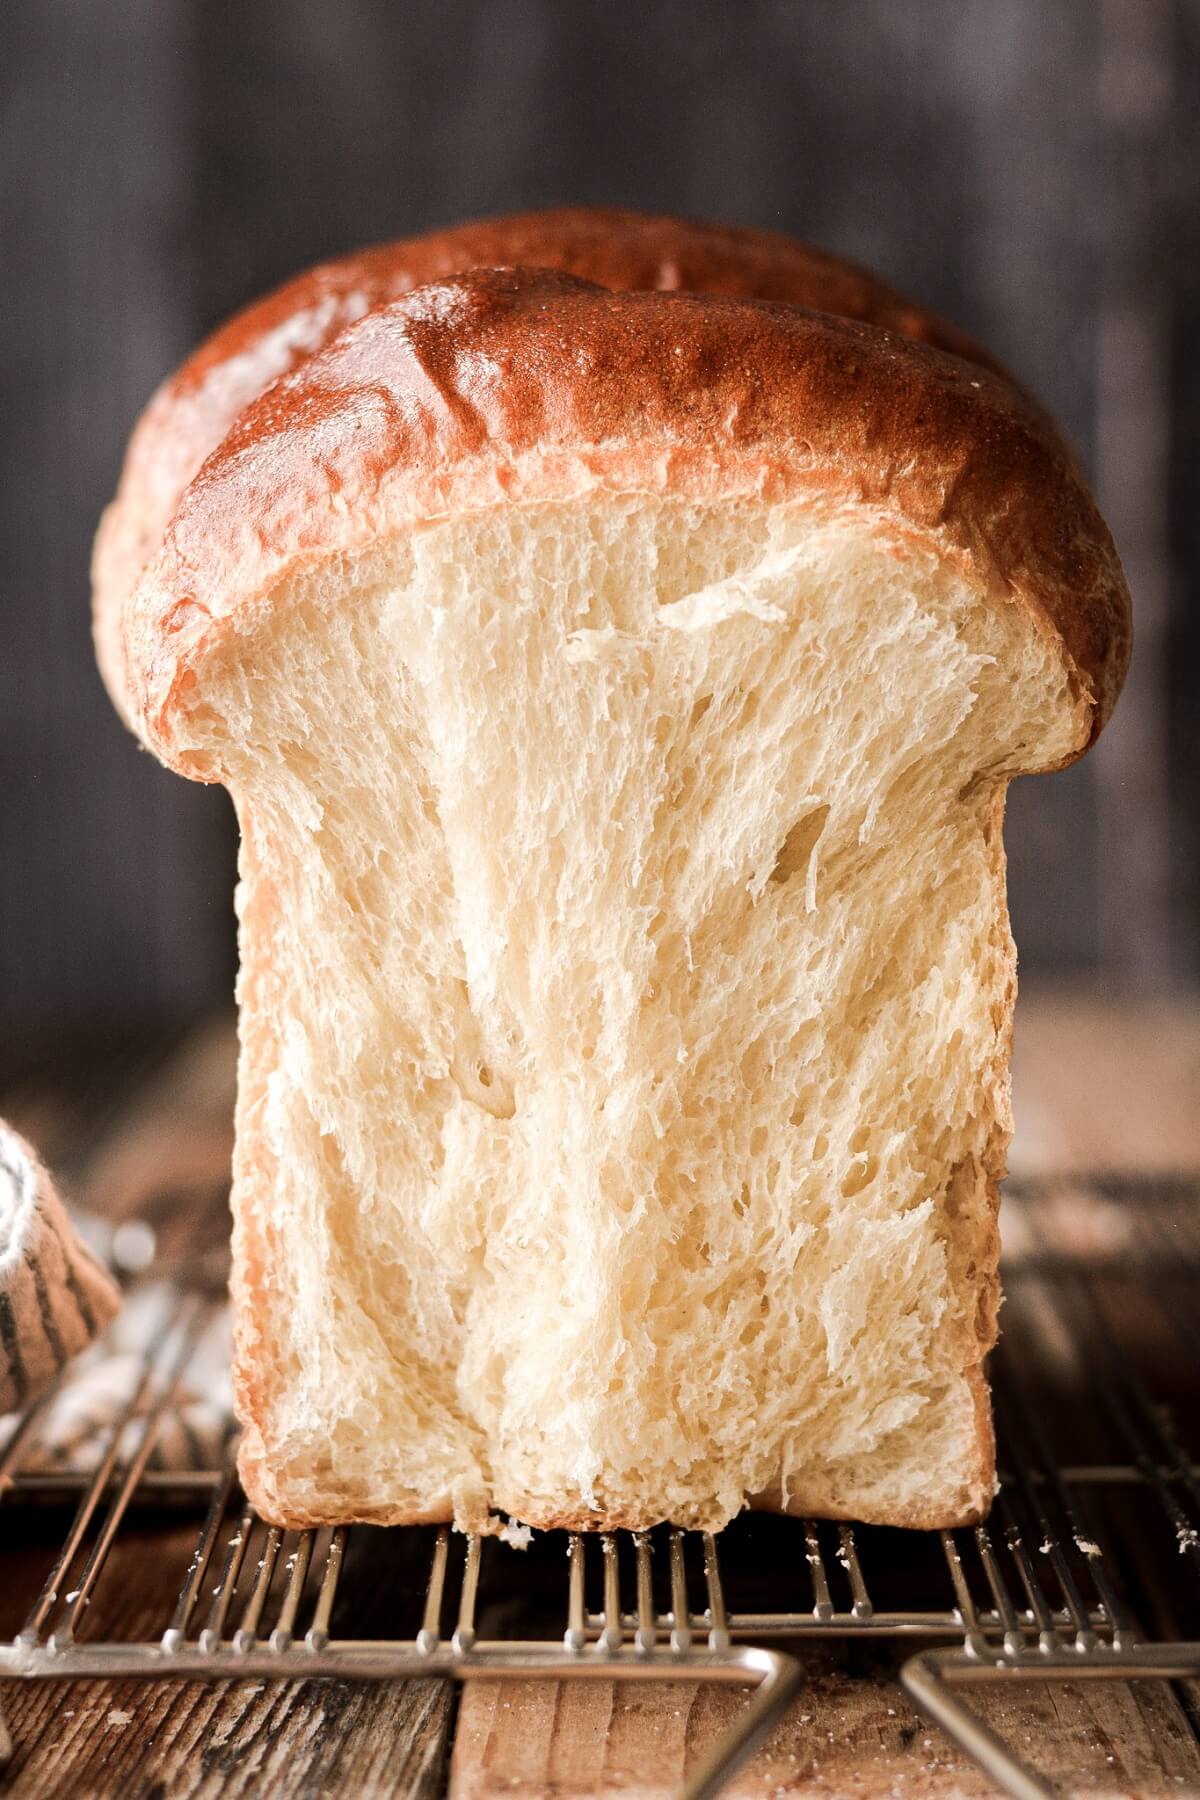 Milk bread with one slice cut to show the texture inside.